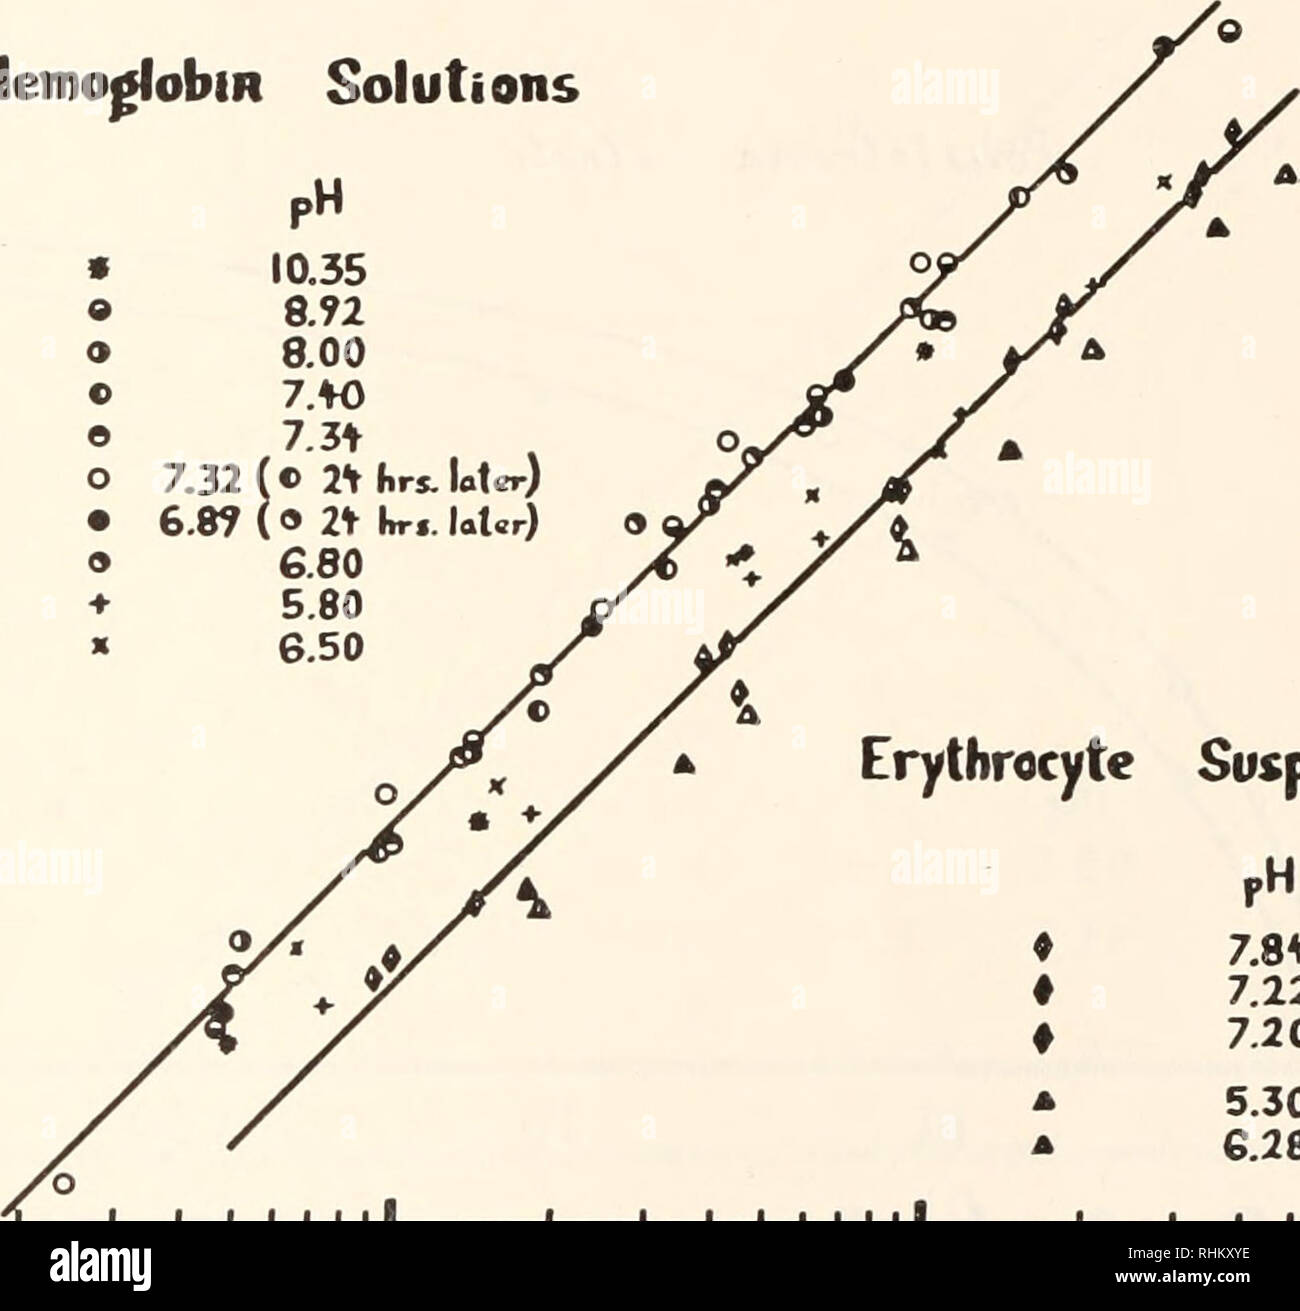 . The Biological bulletin. Biology; Zoology; Biology; Marine Biology. HEMOGLOBIN EVOLUTION 229 RESULTS Instead of presenting all data in the form of the usual &quot;oxygen dissociation curve,&quot; the linear transformation based on the Hill approximation, y = 100 + is used in Figures 1 and 3 (Lemberg and Legge, 1949). The variables y and p are the per cent oxyhemoglobin and the partial pressure of oxygen, respectively. 100-y 0.1. Hemoglobin Solutions • o o « e o 7.32 • 6.89 ( » 2thr«. later) « 6.80 * 5.80 » 6.50 Erythrocyte Suspensions pH 7.8* 7.22 7.20 5.30 6.28 0.1 10 100 FIGURE 1. Oxygen e Stock Photo